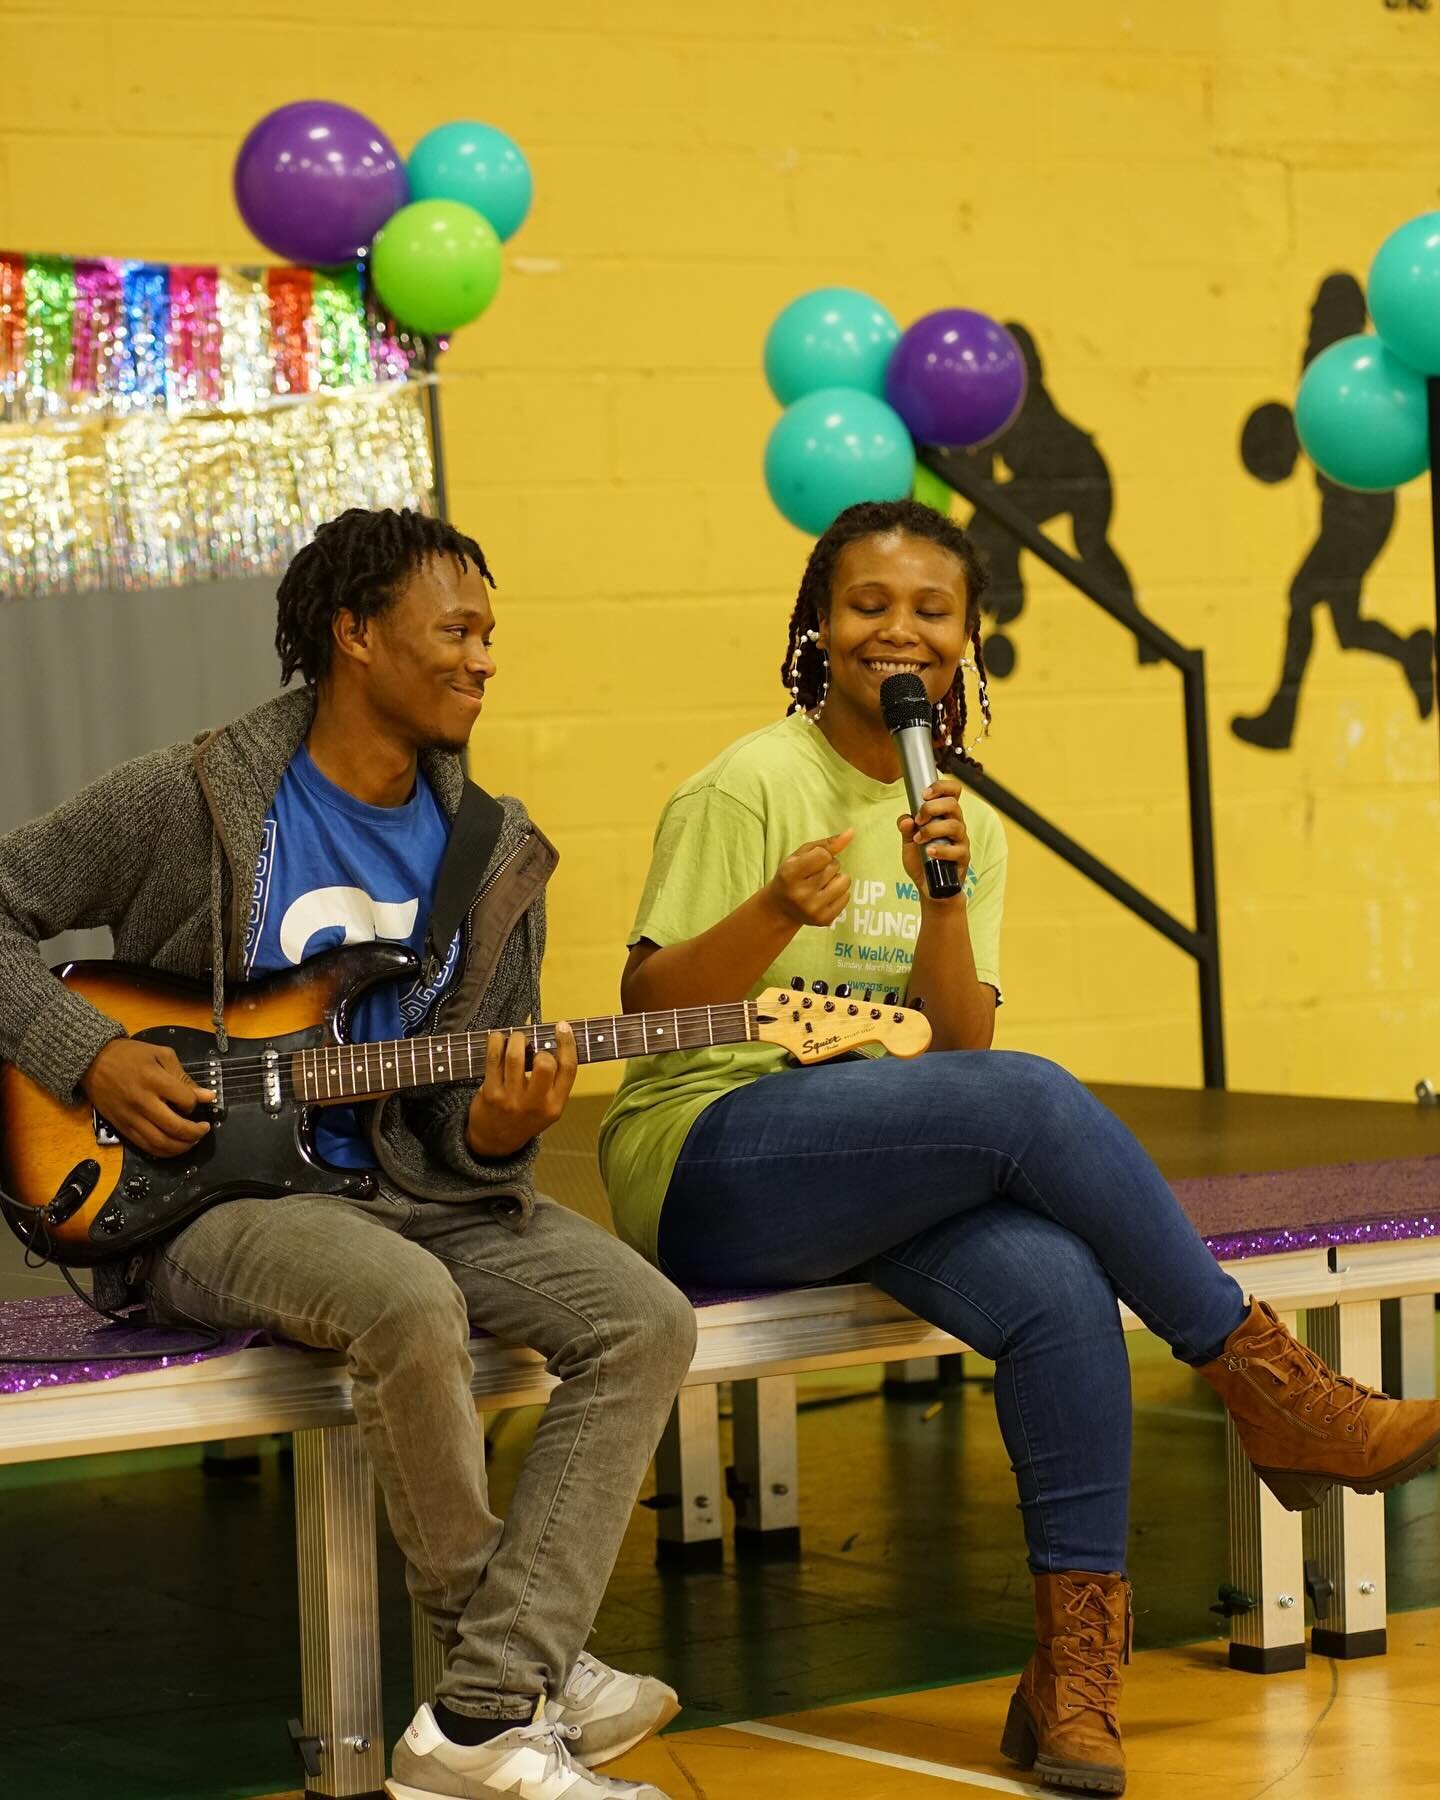 E-STEAMing the youth is what we&rsquo;re all about so what&rsquo;s an event without performing arts, arts &amp; crafts, and creative games?! 👩🏾&zwj;🎨 We are both STEM AND the Arts! 🙌

So grateful for Tia + Julien, CP@GT alum, for blessing the mic